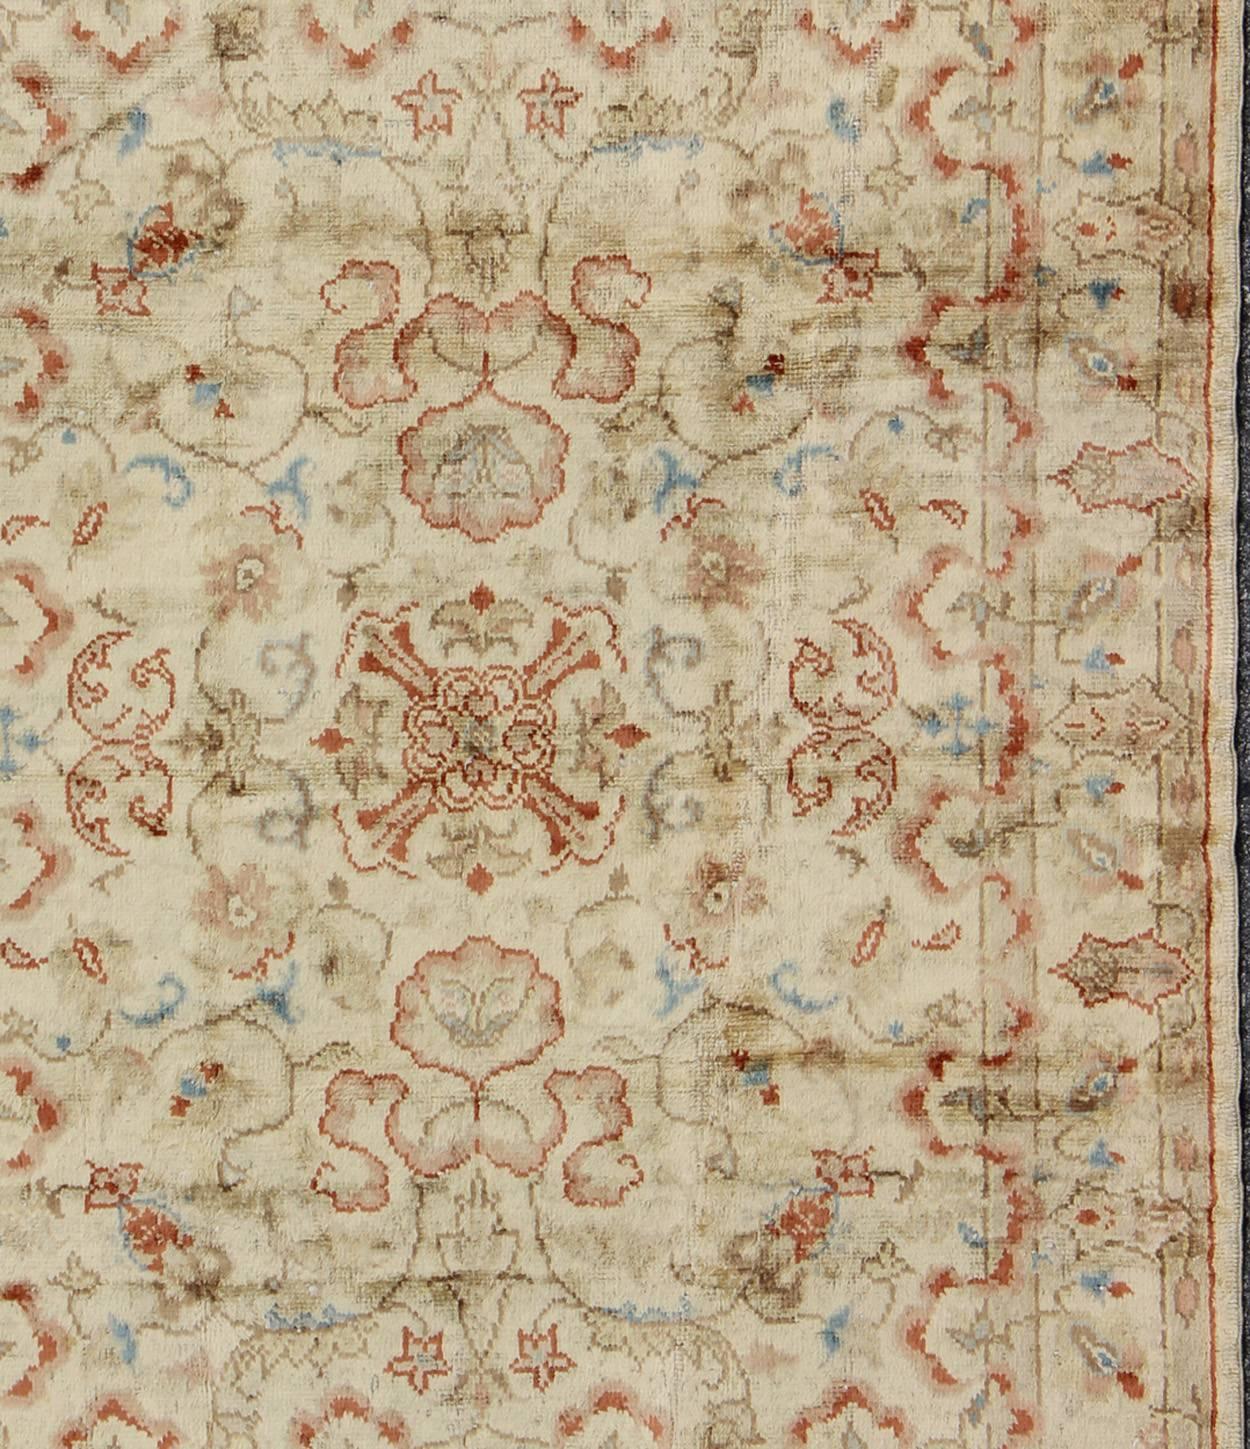 Hand-Knotted Square Vintage Oushak Rug with All-Over Floral Design in Butter, Red, Lt. Green